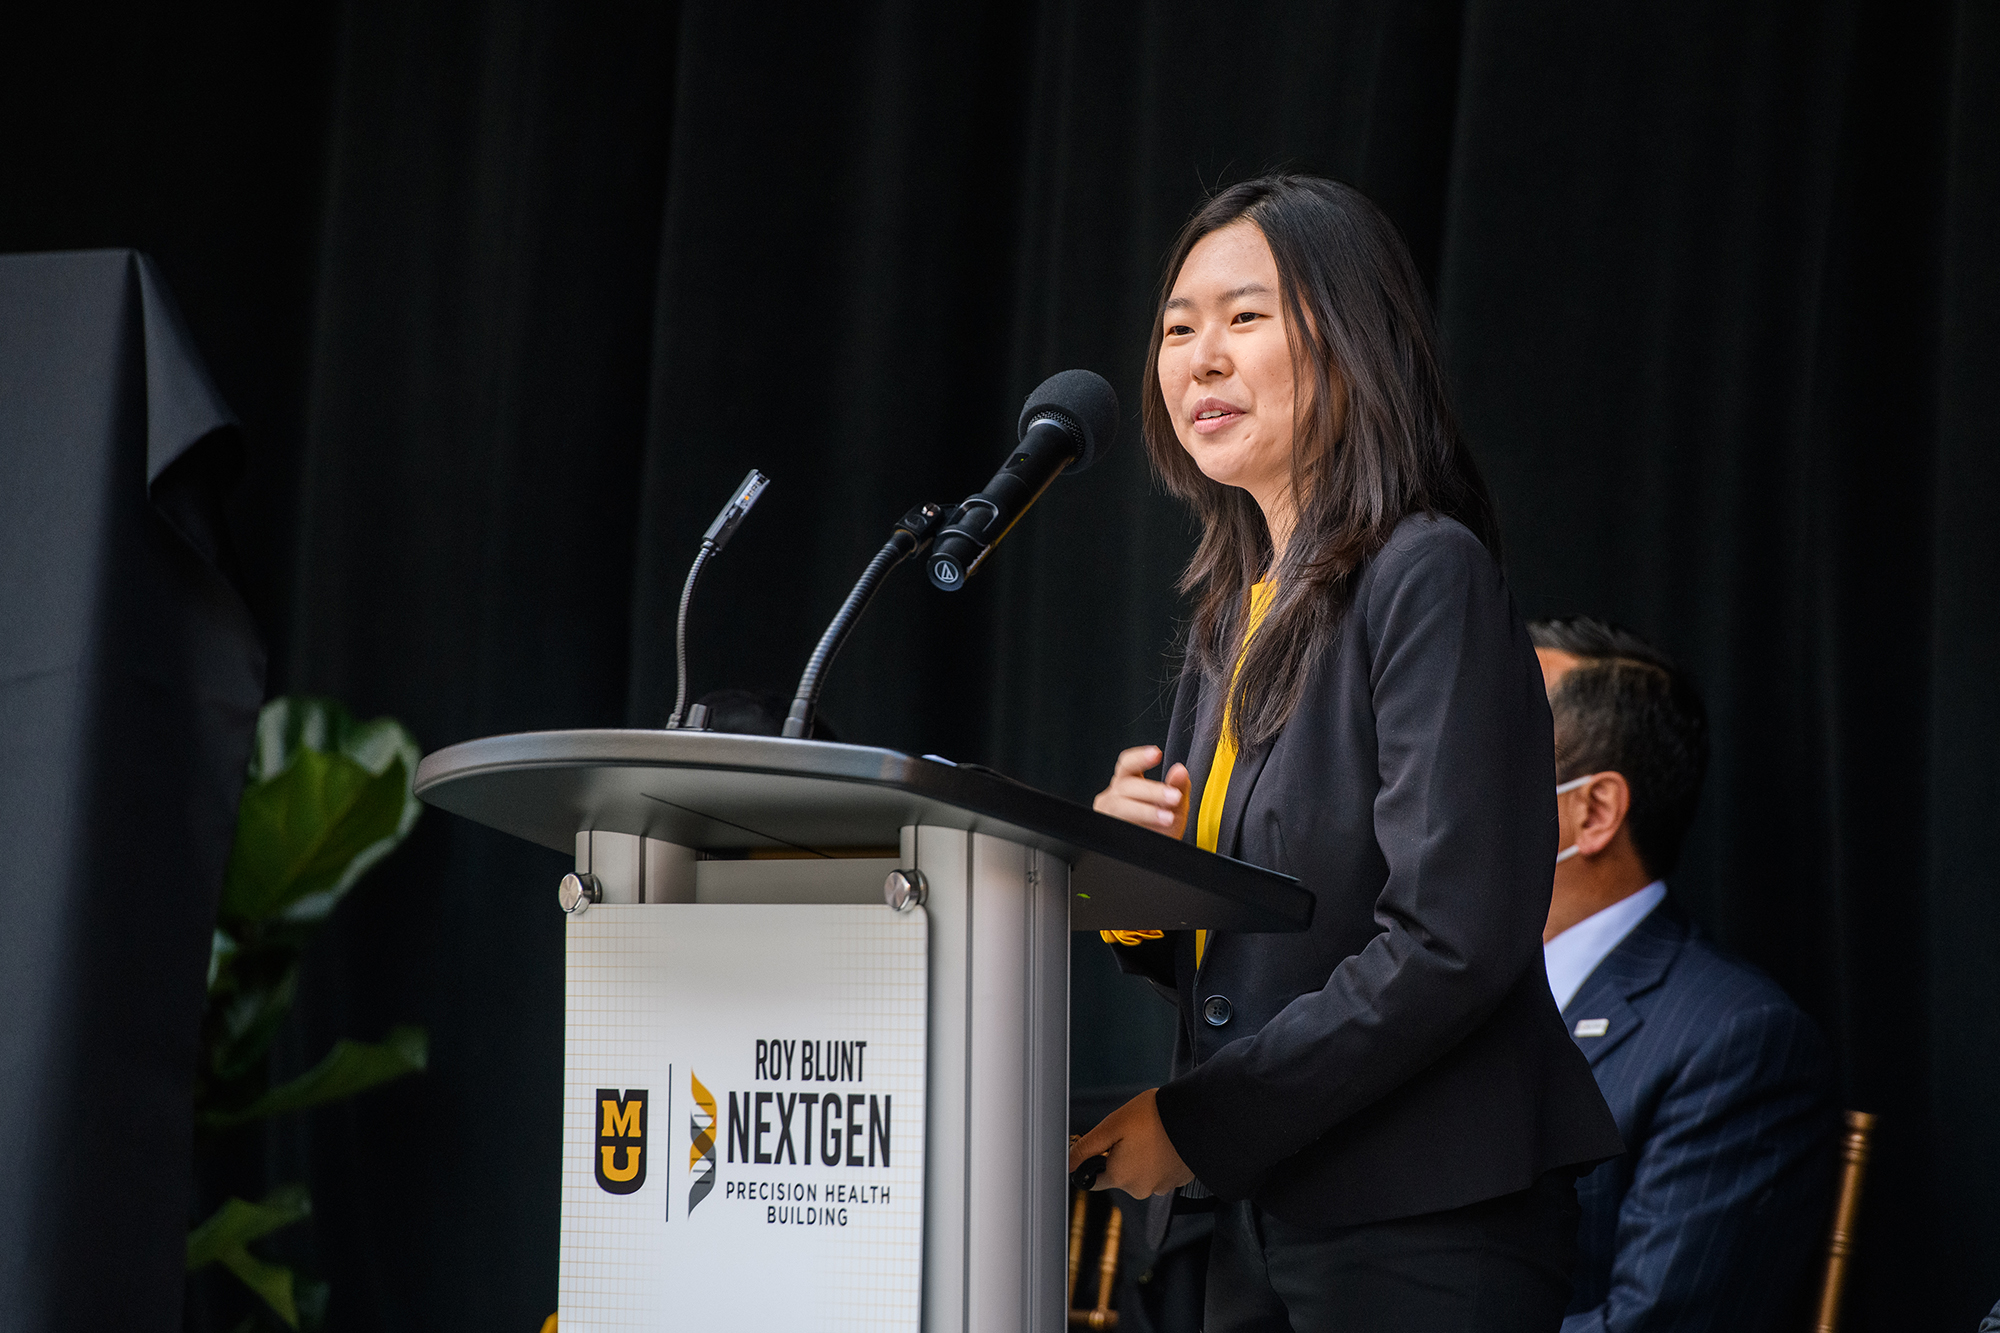 Rebecca Shyu, MU College of Engineering Student, speaks during the Roy Blunt NextGen building Grand Opening Program on Tuesday, Oct. 19, 2021 in Columbia, Mo.